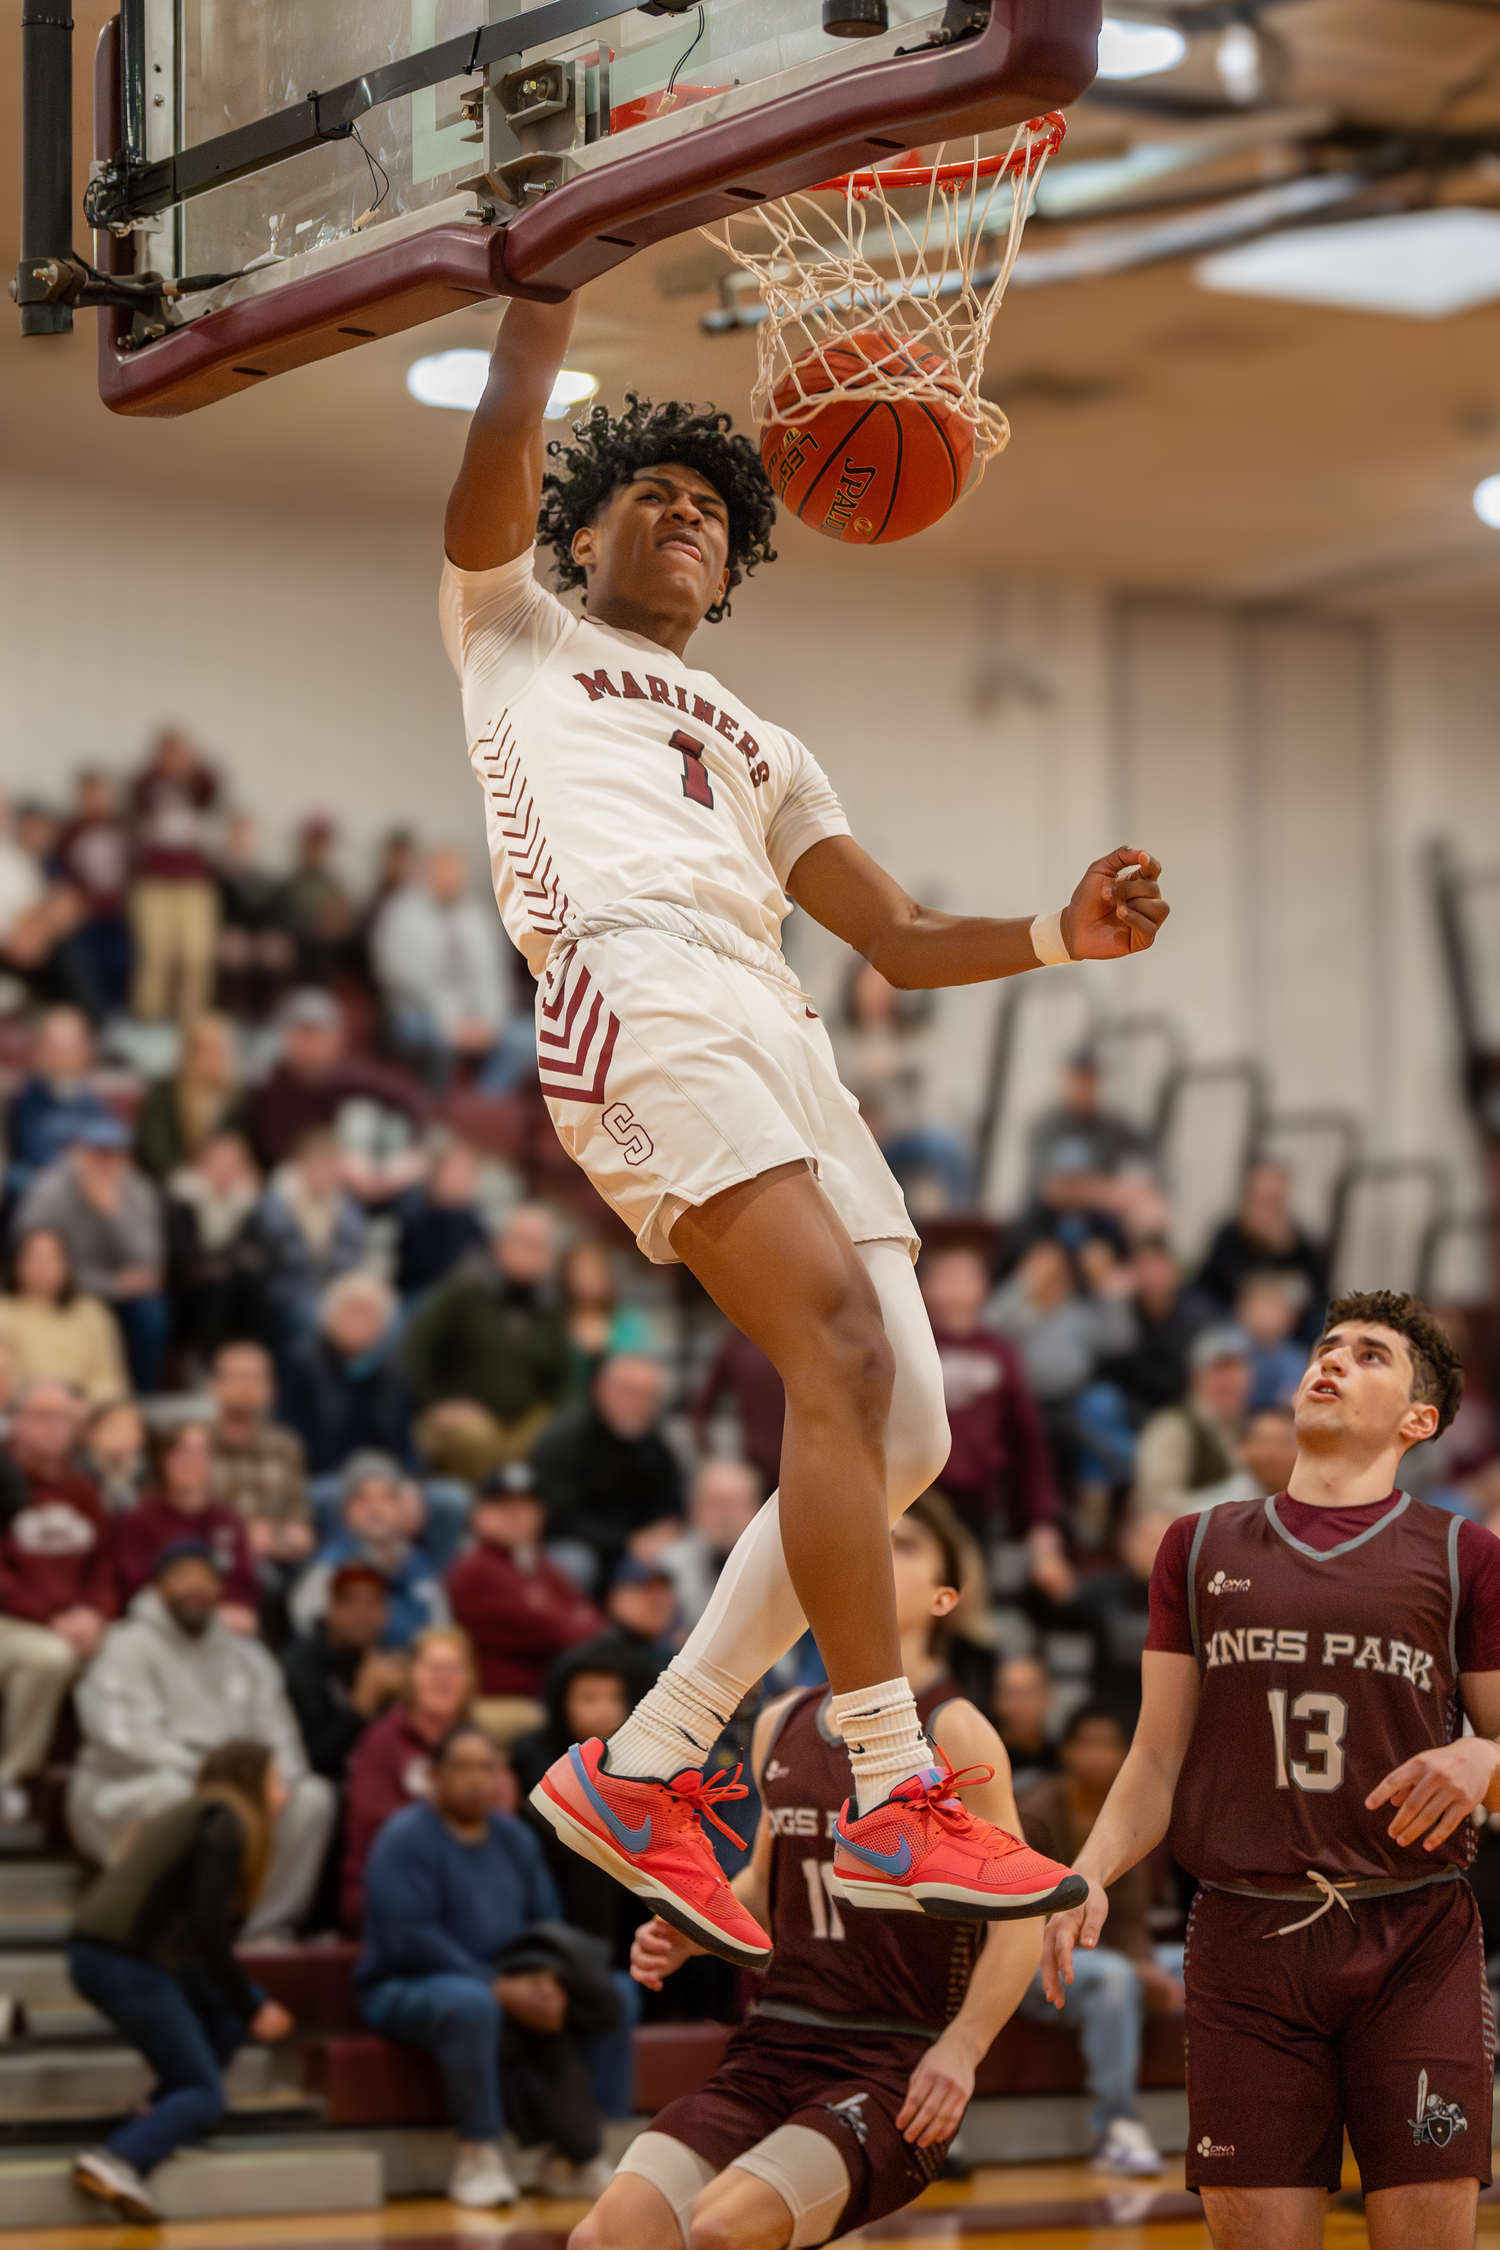 Dominick White had a few dunks on Saturday, helping the Mariners to a smooth 64-33 quarterfinals victory over Kings Park.  RON ESPOSITO/SOUTHAMPTON SCHOOL DISTRICT